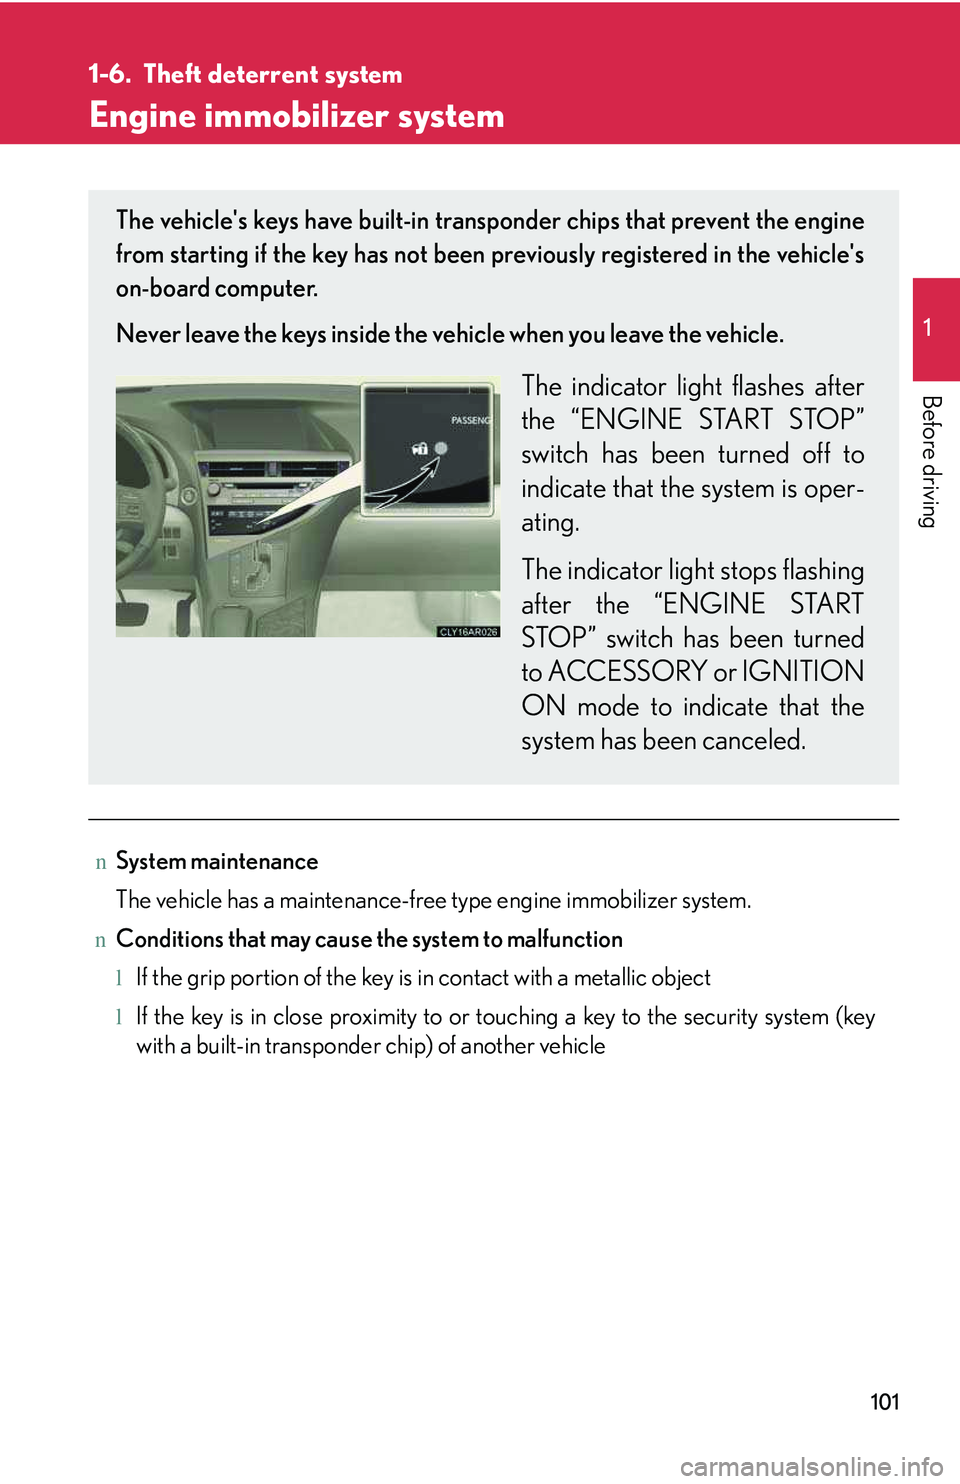 LEXUS RX350 2011  Owners Manual 101
1

Before driving
1-6. Theft deterrent system
Engine immobilizer system
nSystem maintenance
The vehicle has a maintenance-free type engine immobilizer system.
nConditions that may cause the system